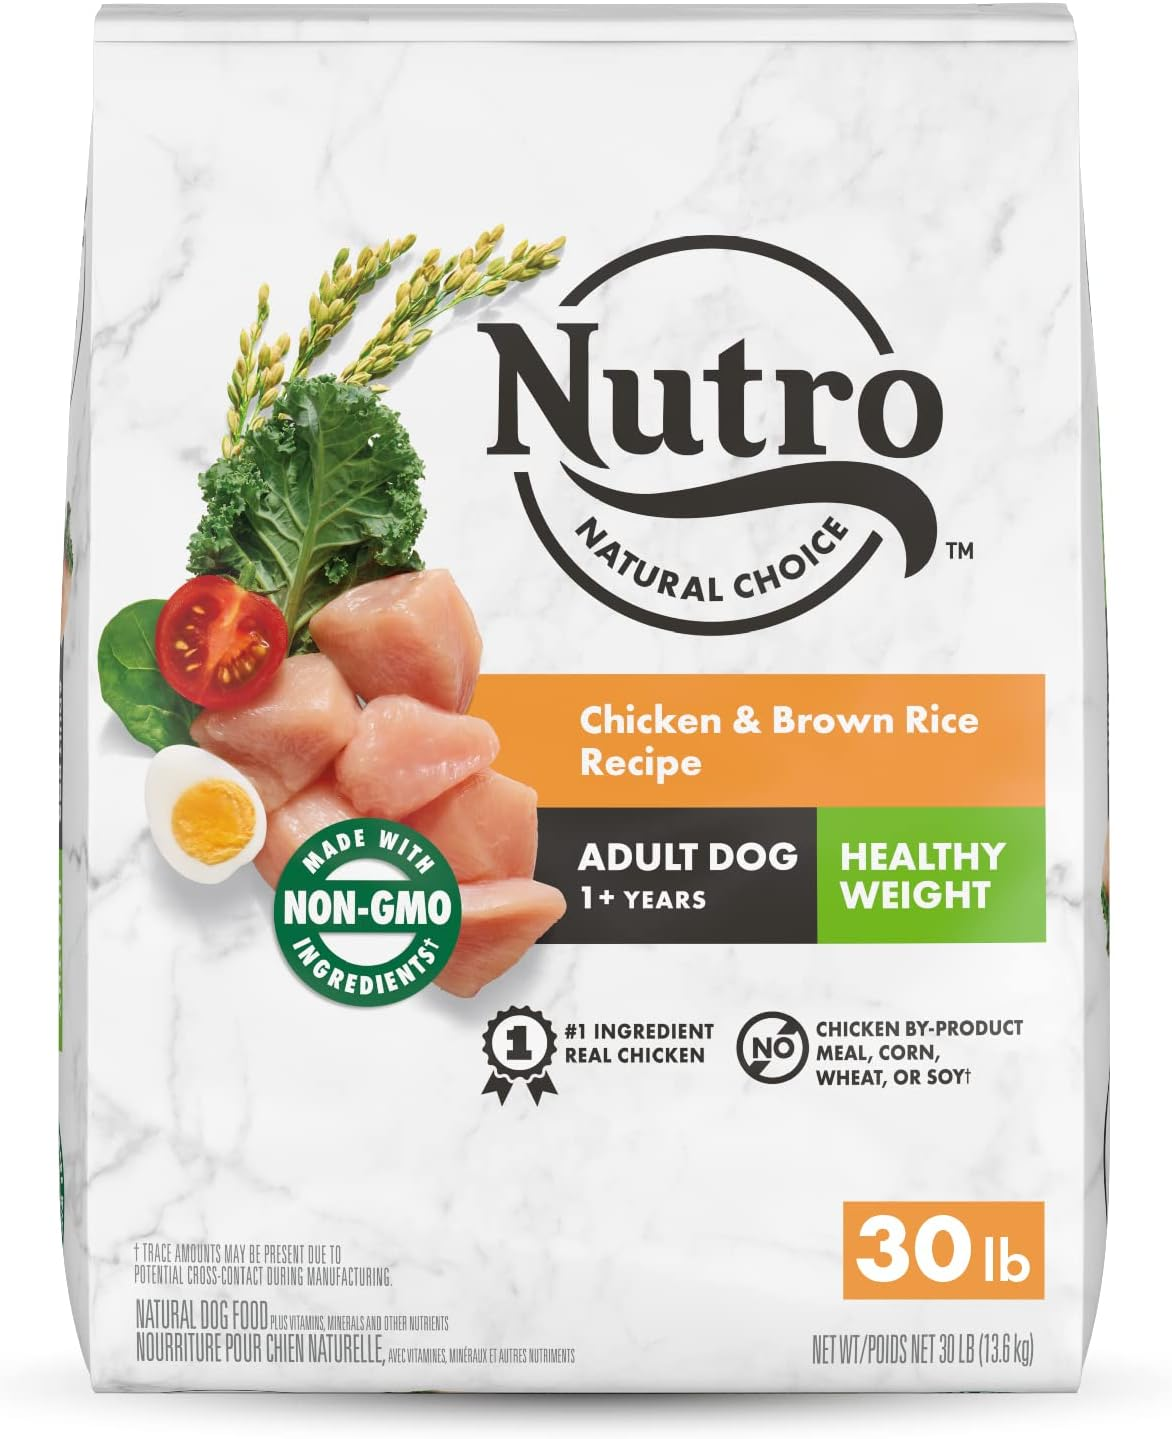 NUTRO NATURAL CHOICE Healthy Weight Adult Dry Dog Food, Chicken & Brown Rice Recipe Dog Kibble, 30 lb. Bag $32.49 (or $36.24 with just 5% s&s)